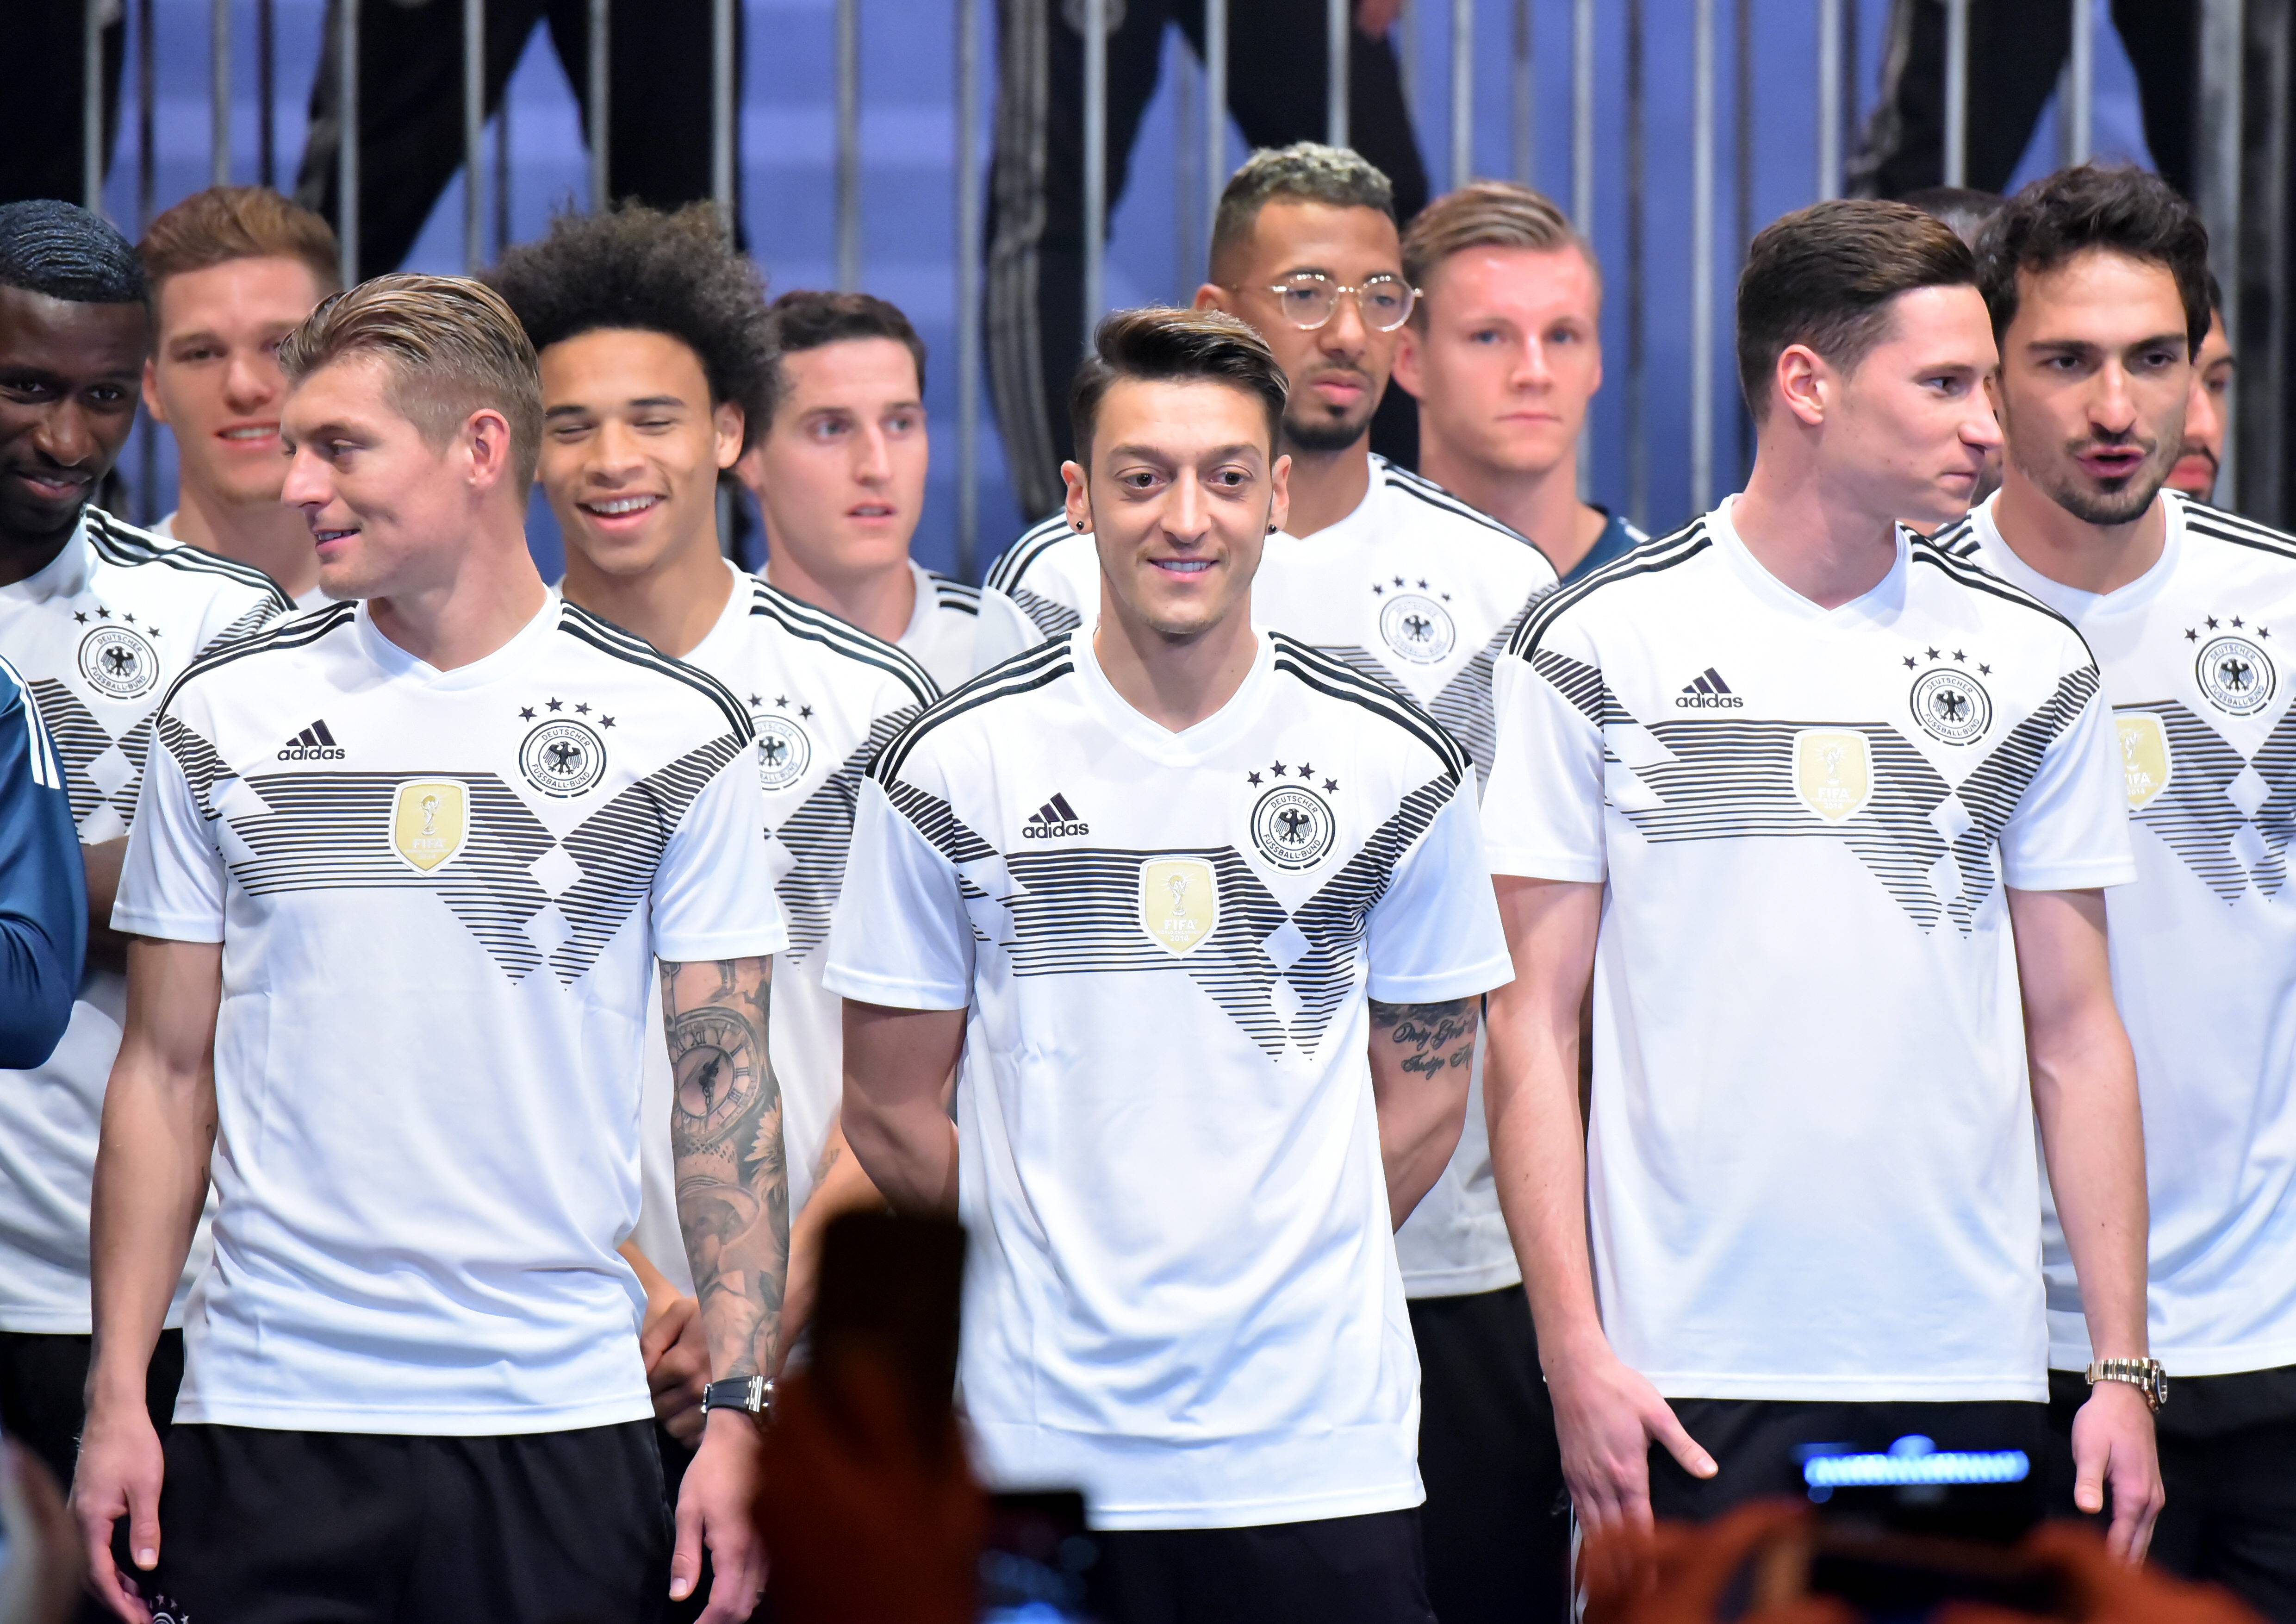 Germany's football captains in national team jerseys